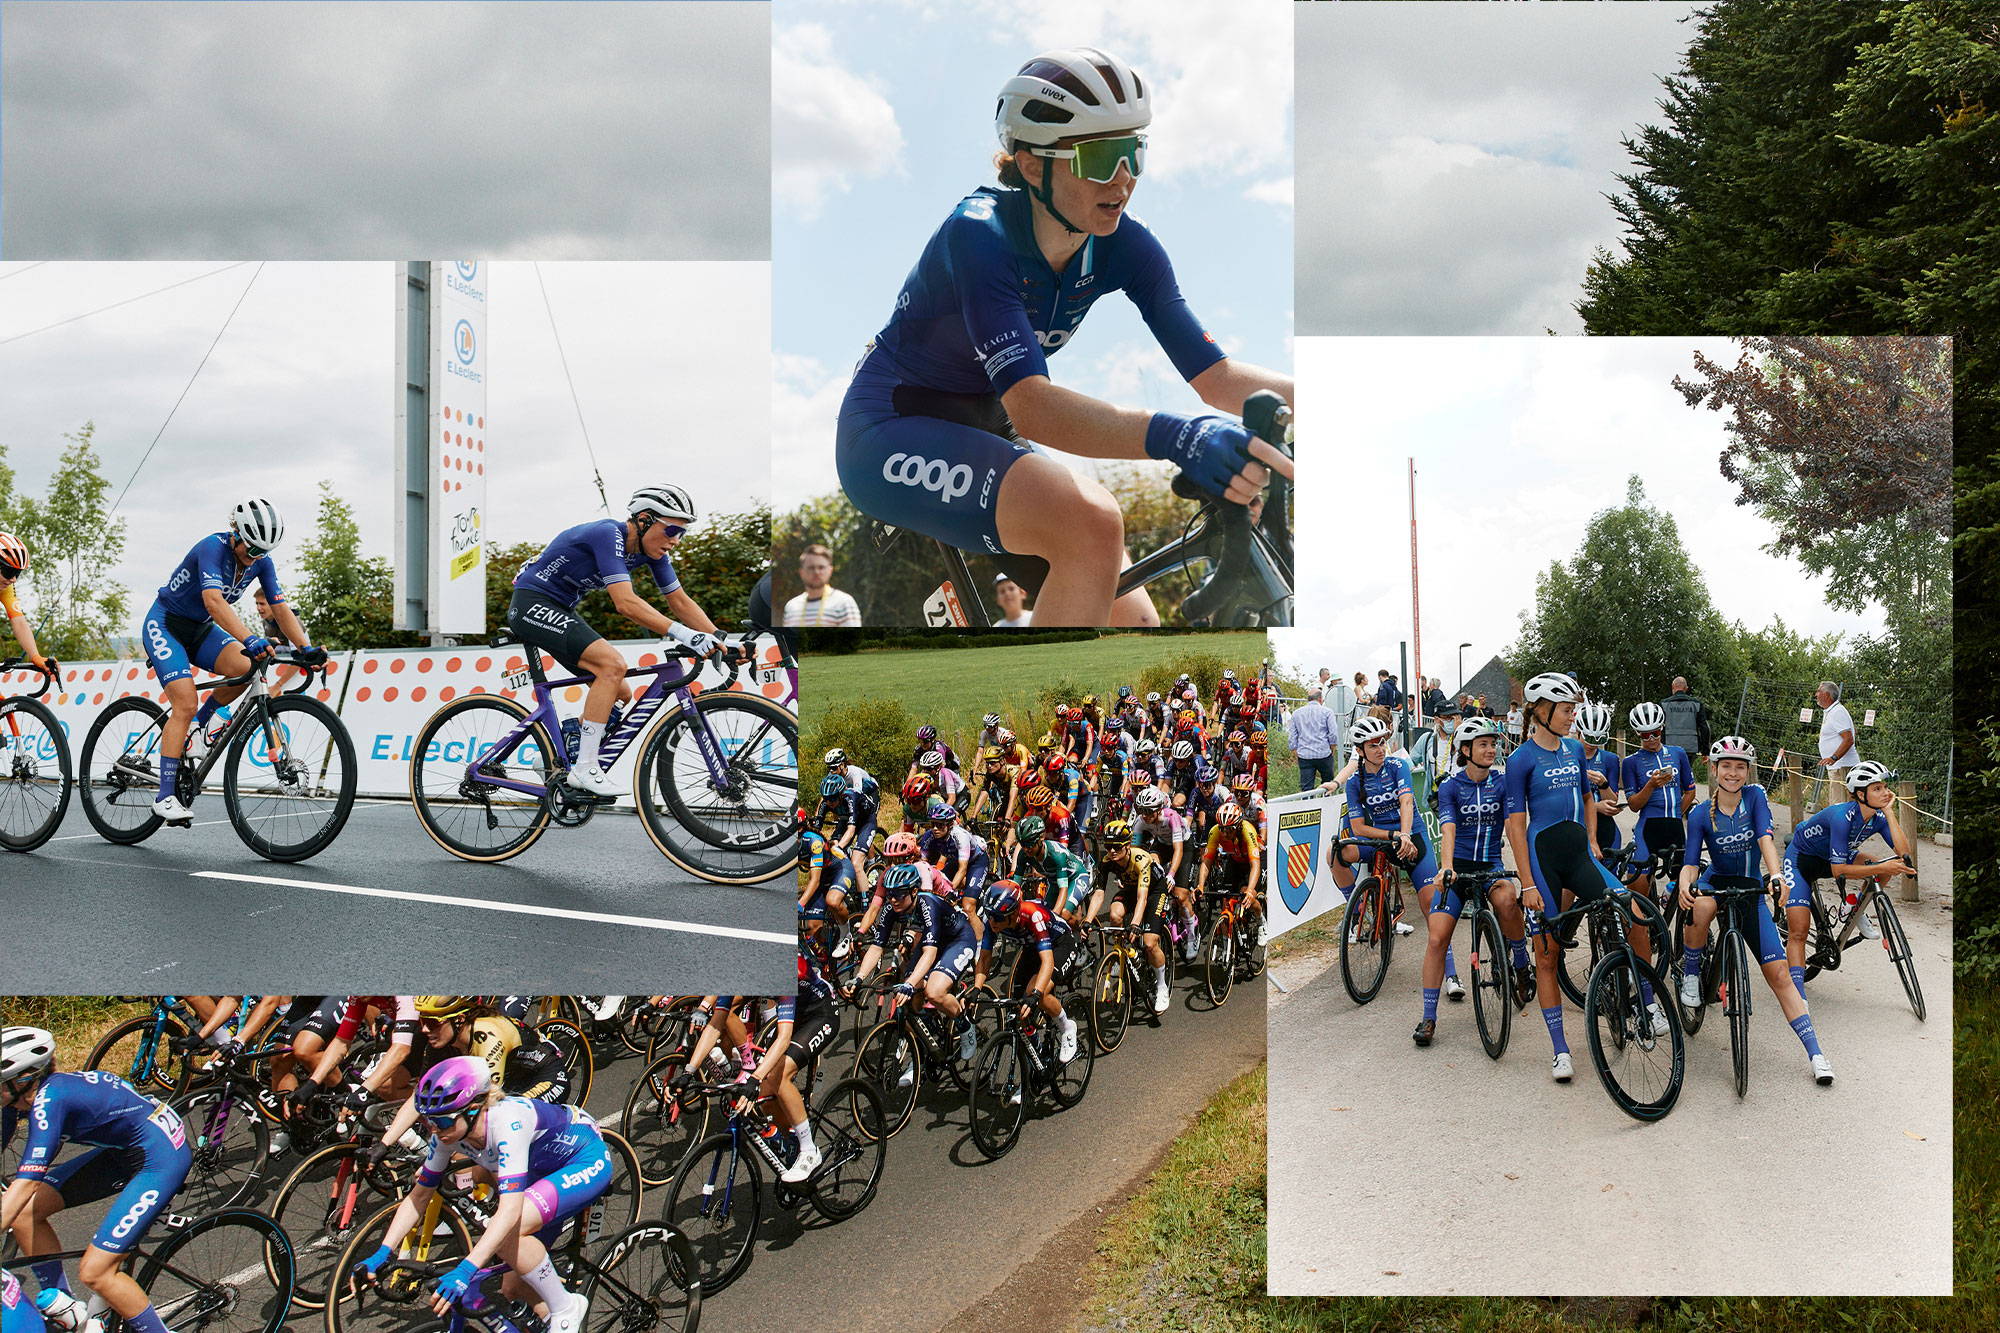 Collage of photos from the race